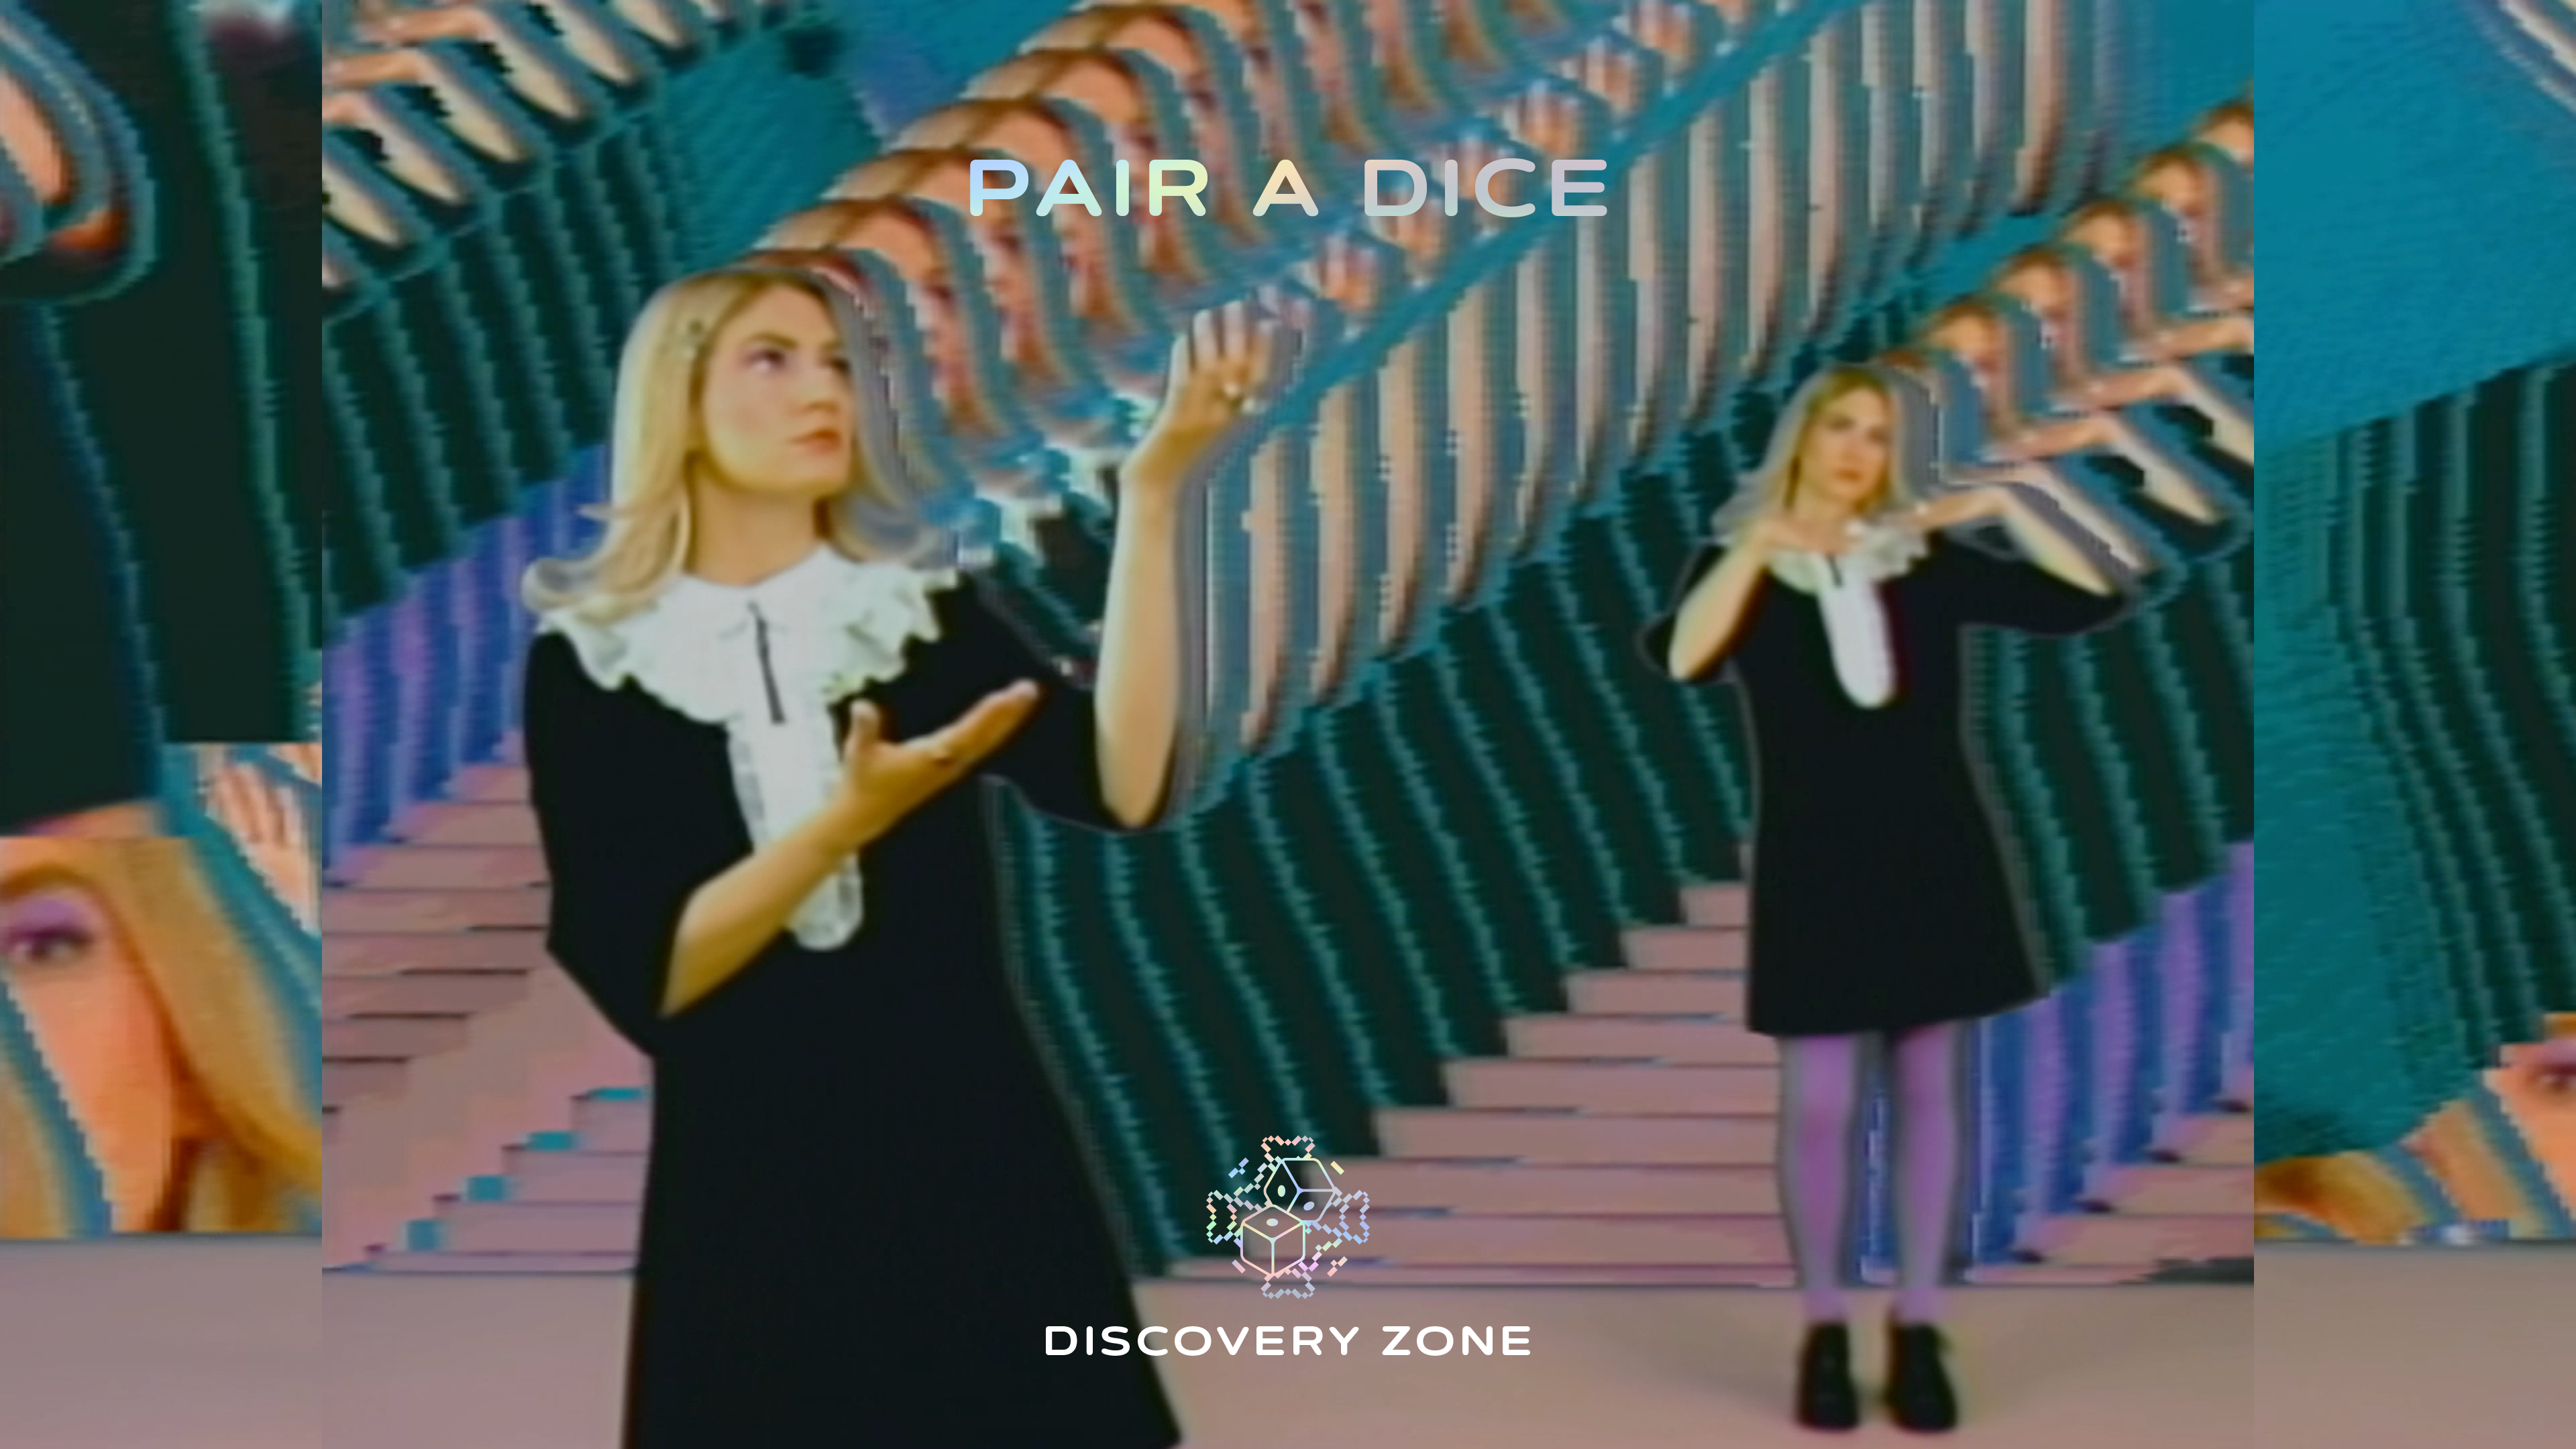 Link to Video for Discovery Zone – Pair A Dice